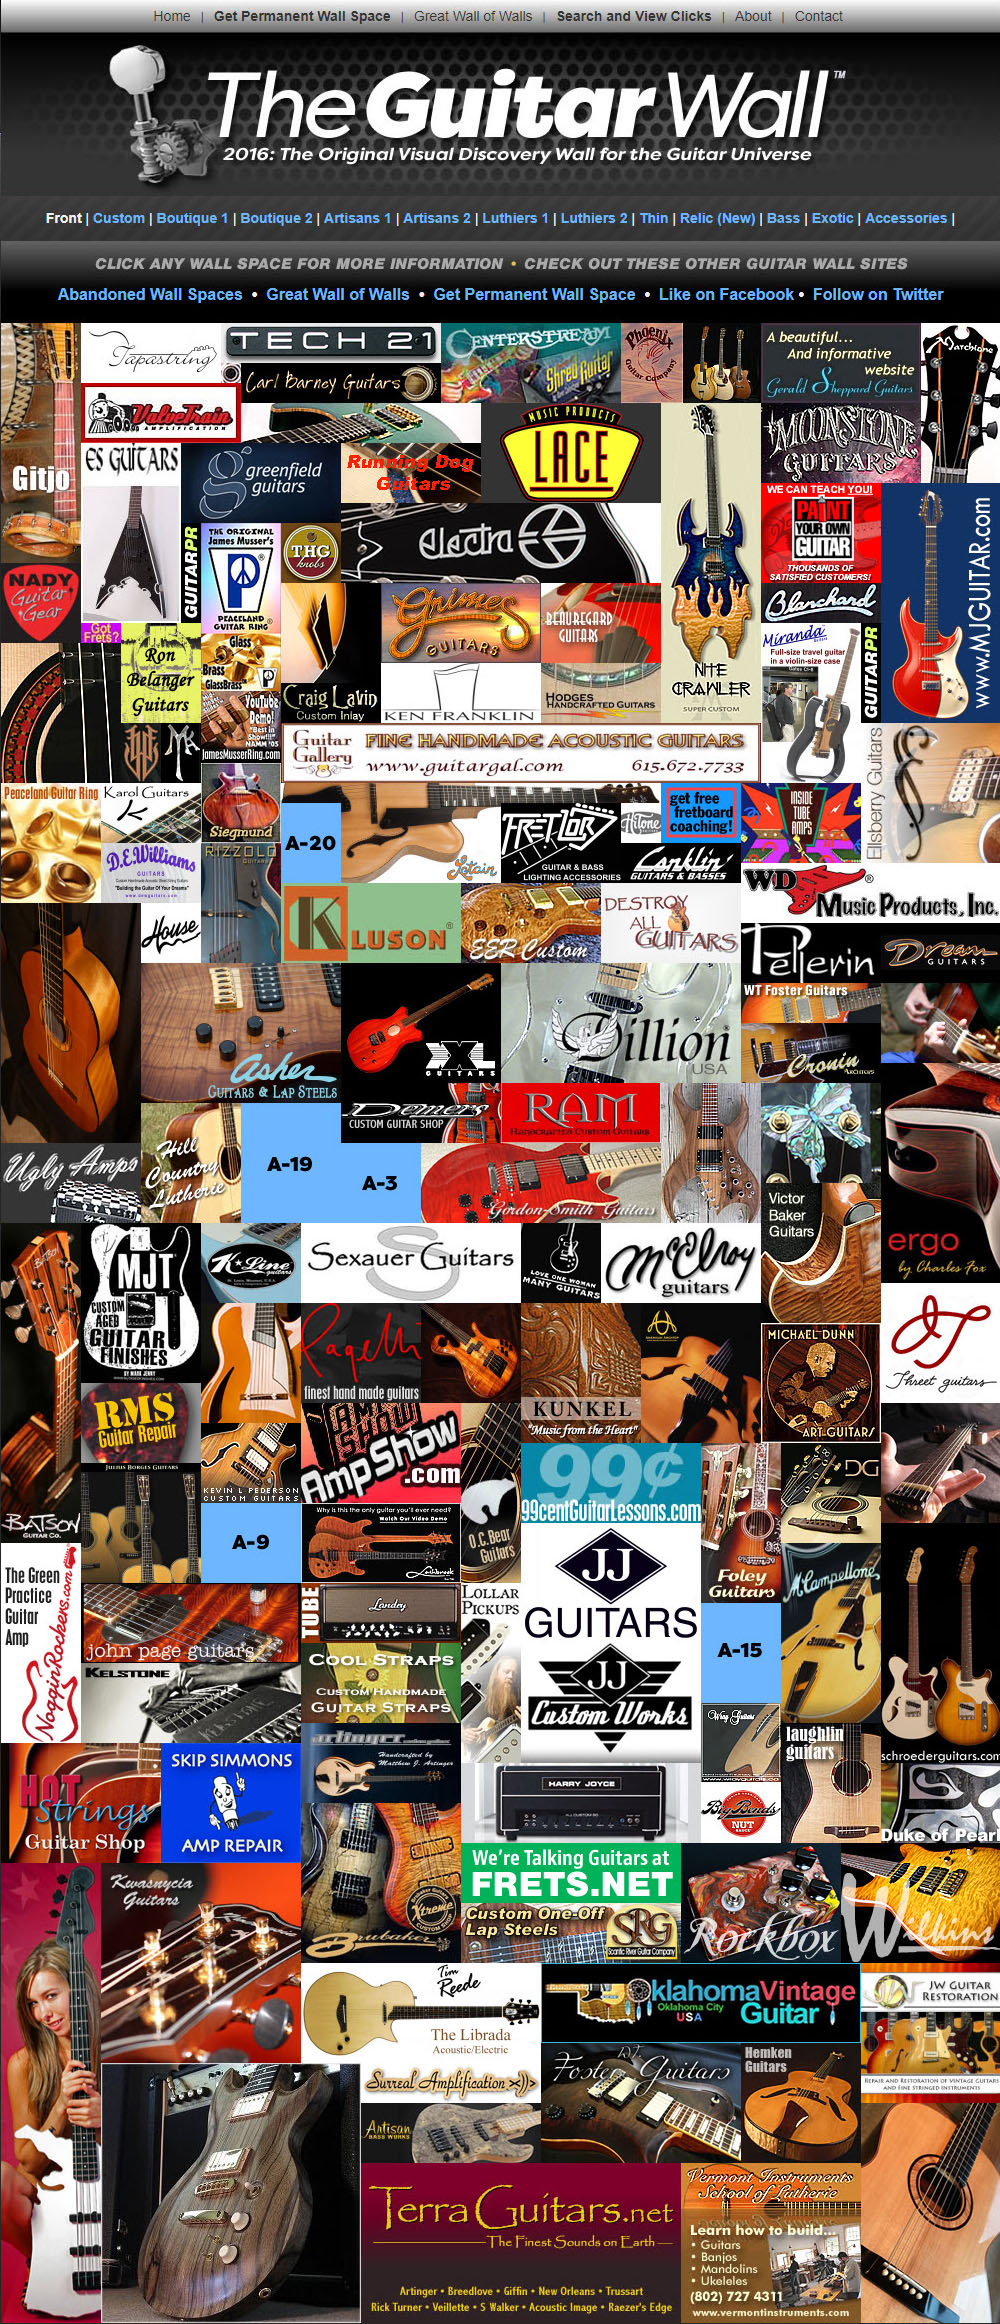 The Guitar Wall Homepage